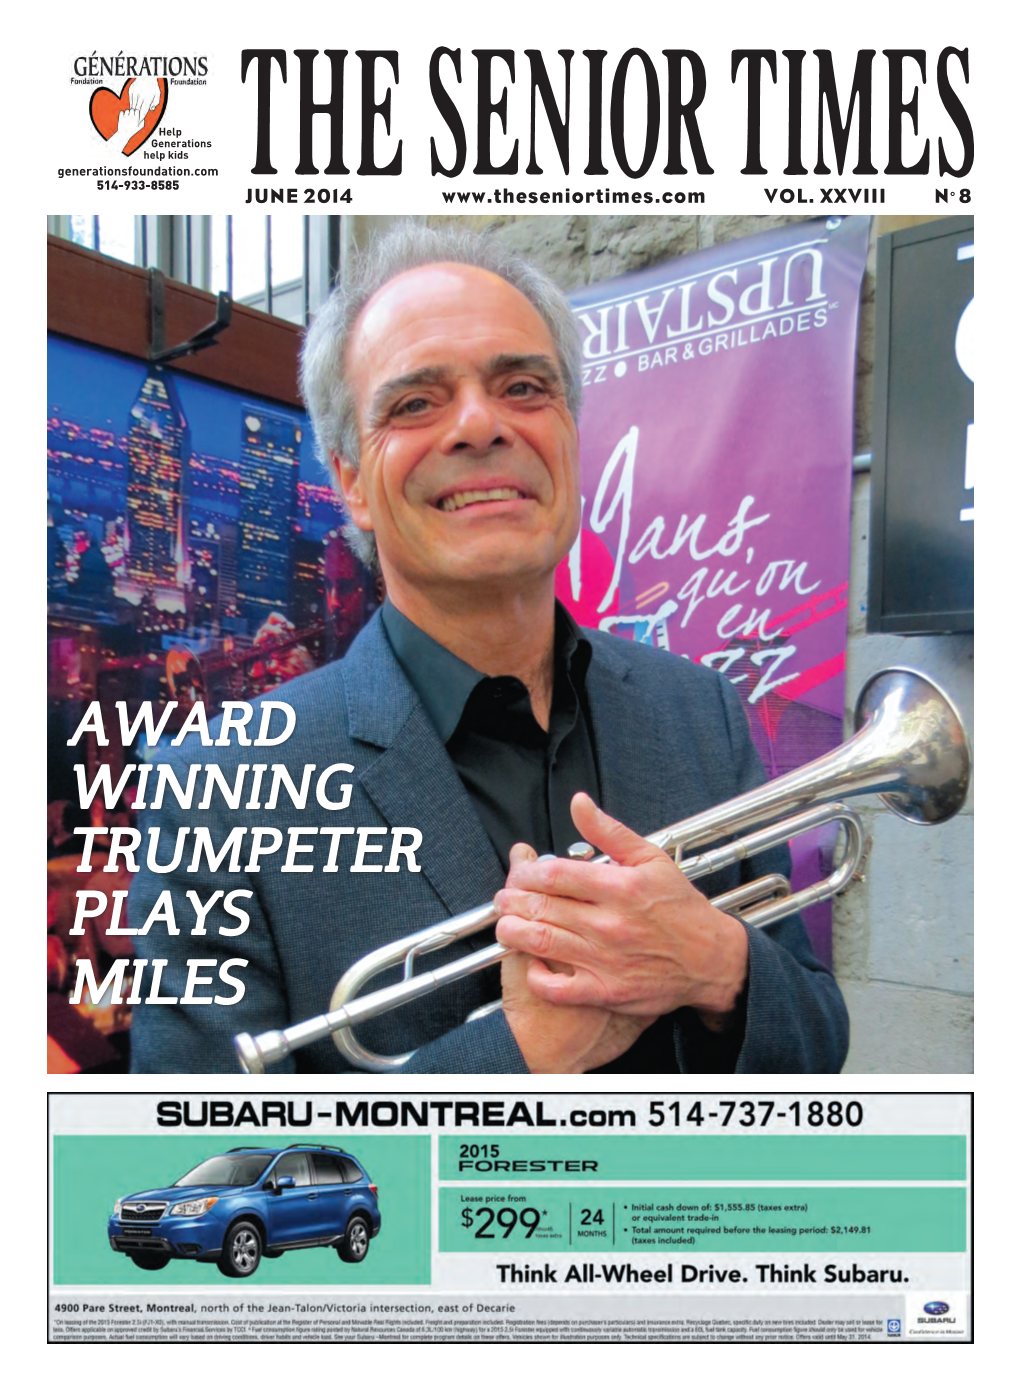 Award Winning Trumpeter Plays Miles Upper Canada Playhouse $89 the Ladies Foursome by Norman Foster, July 6